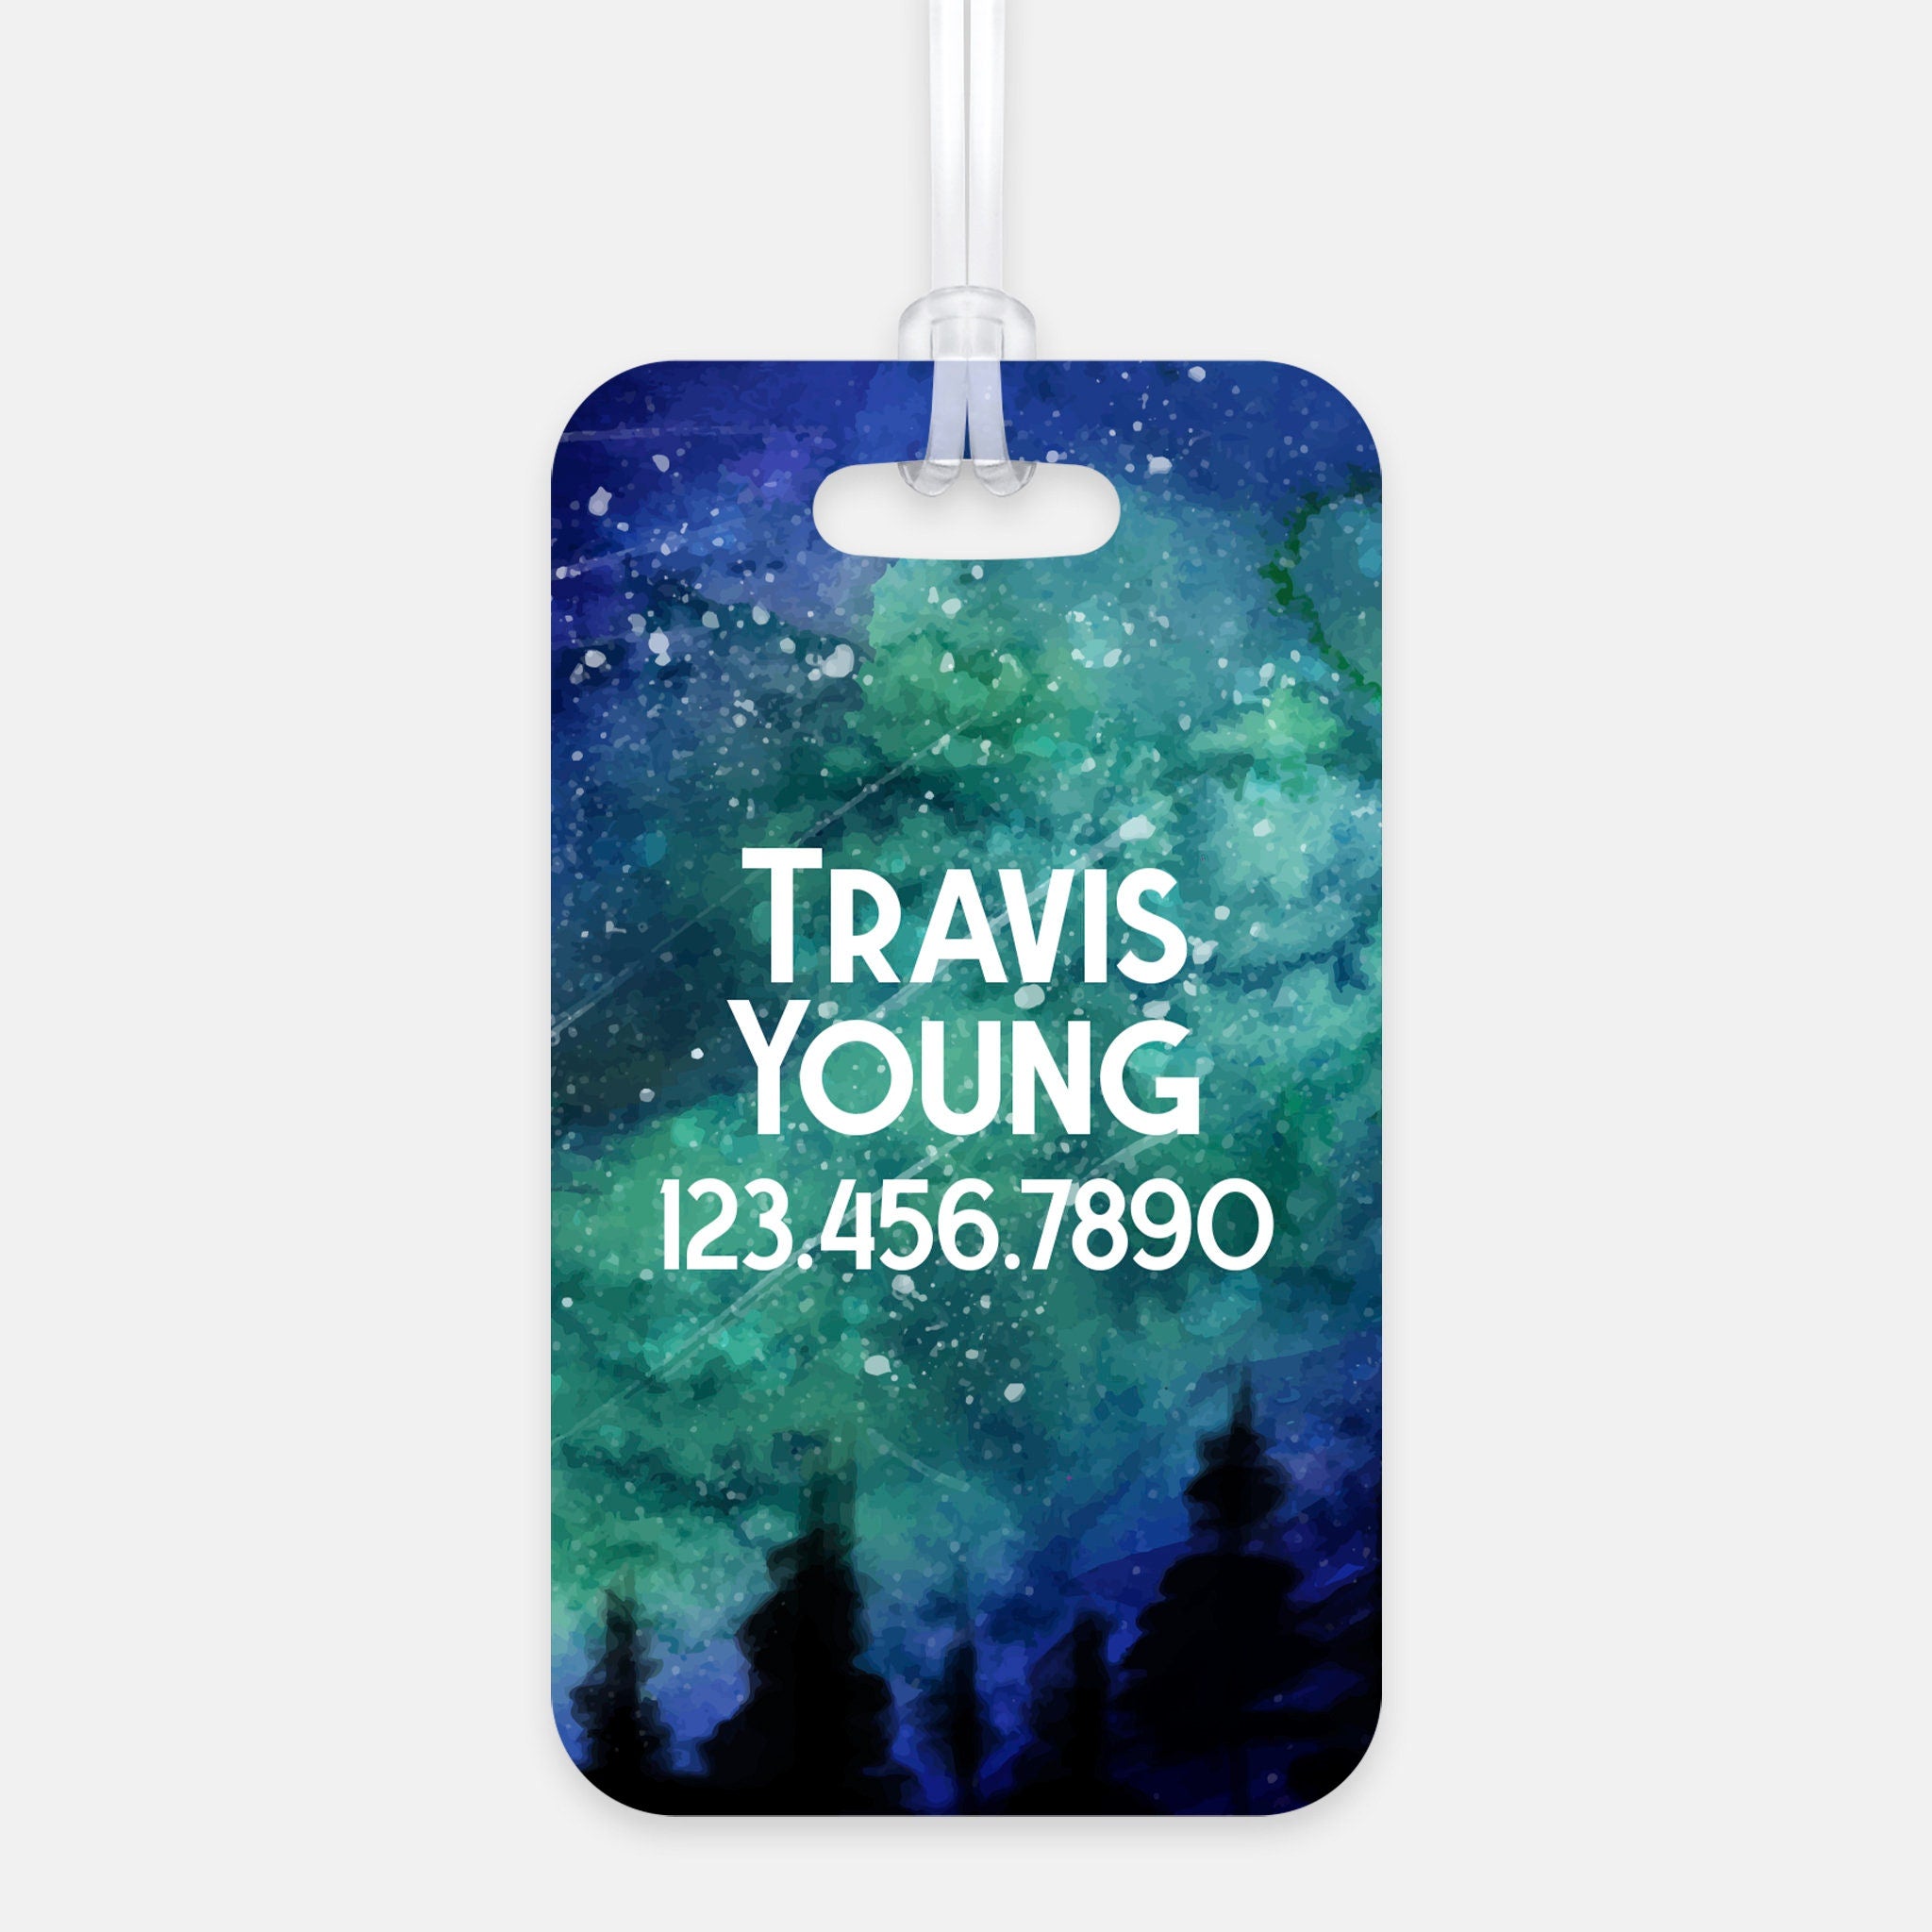 Luggage Tags Personalized Backpack Tag Bag Tags Name Tags -  Israel